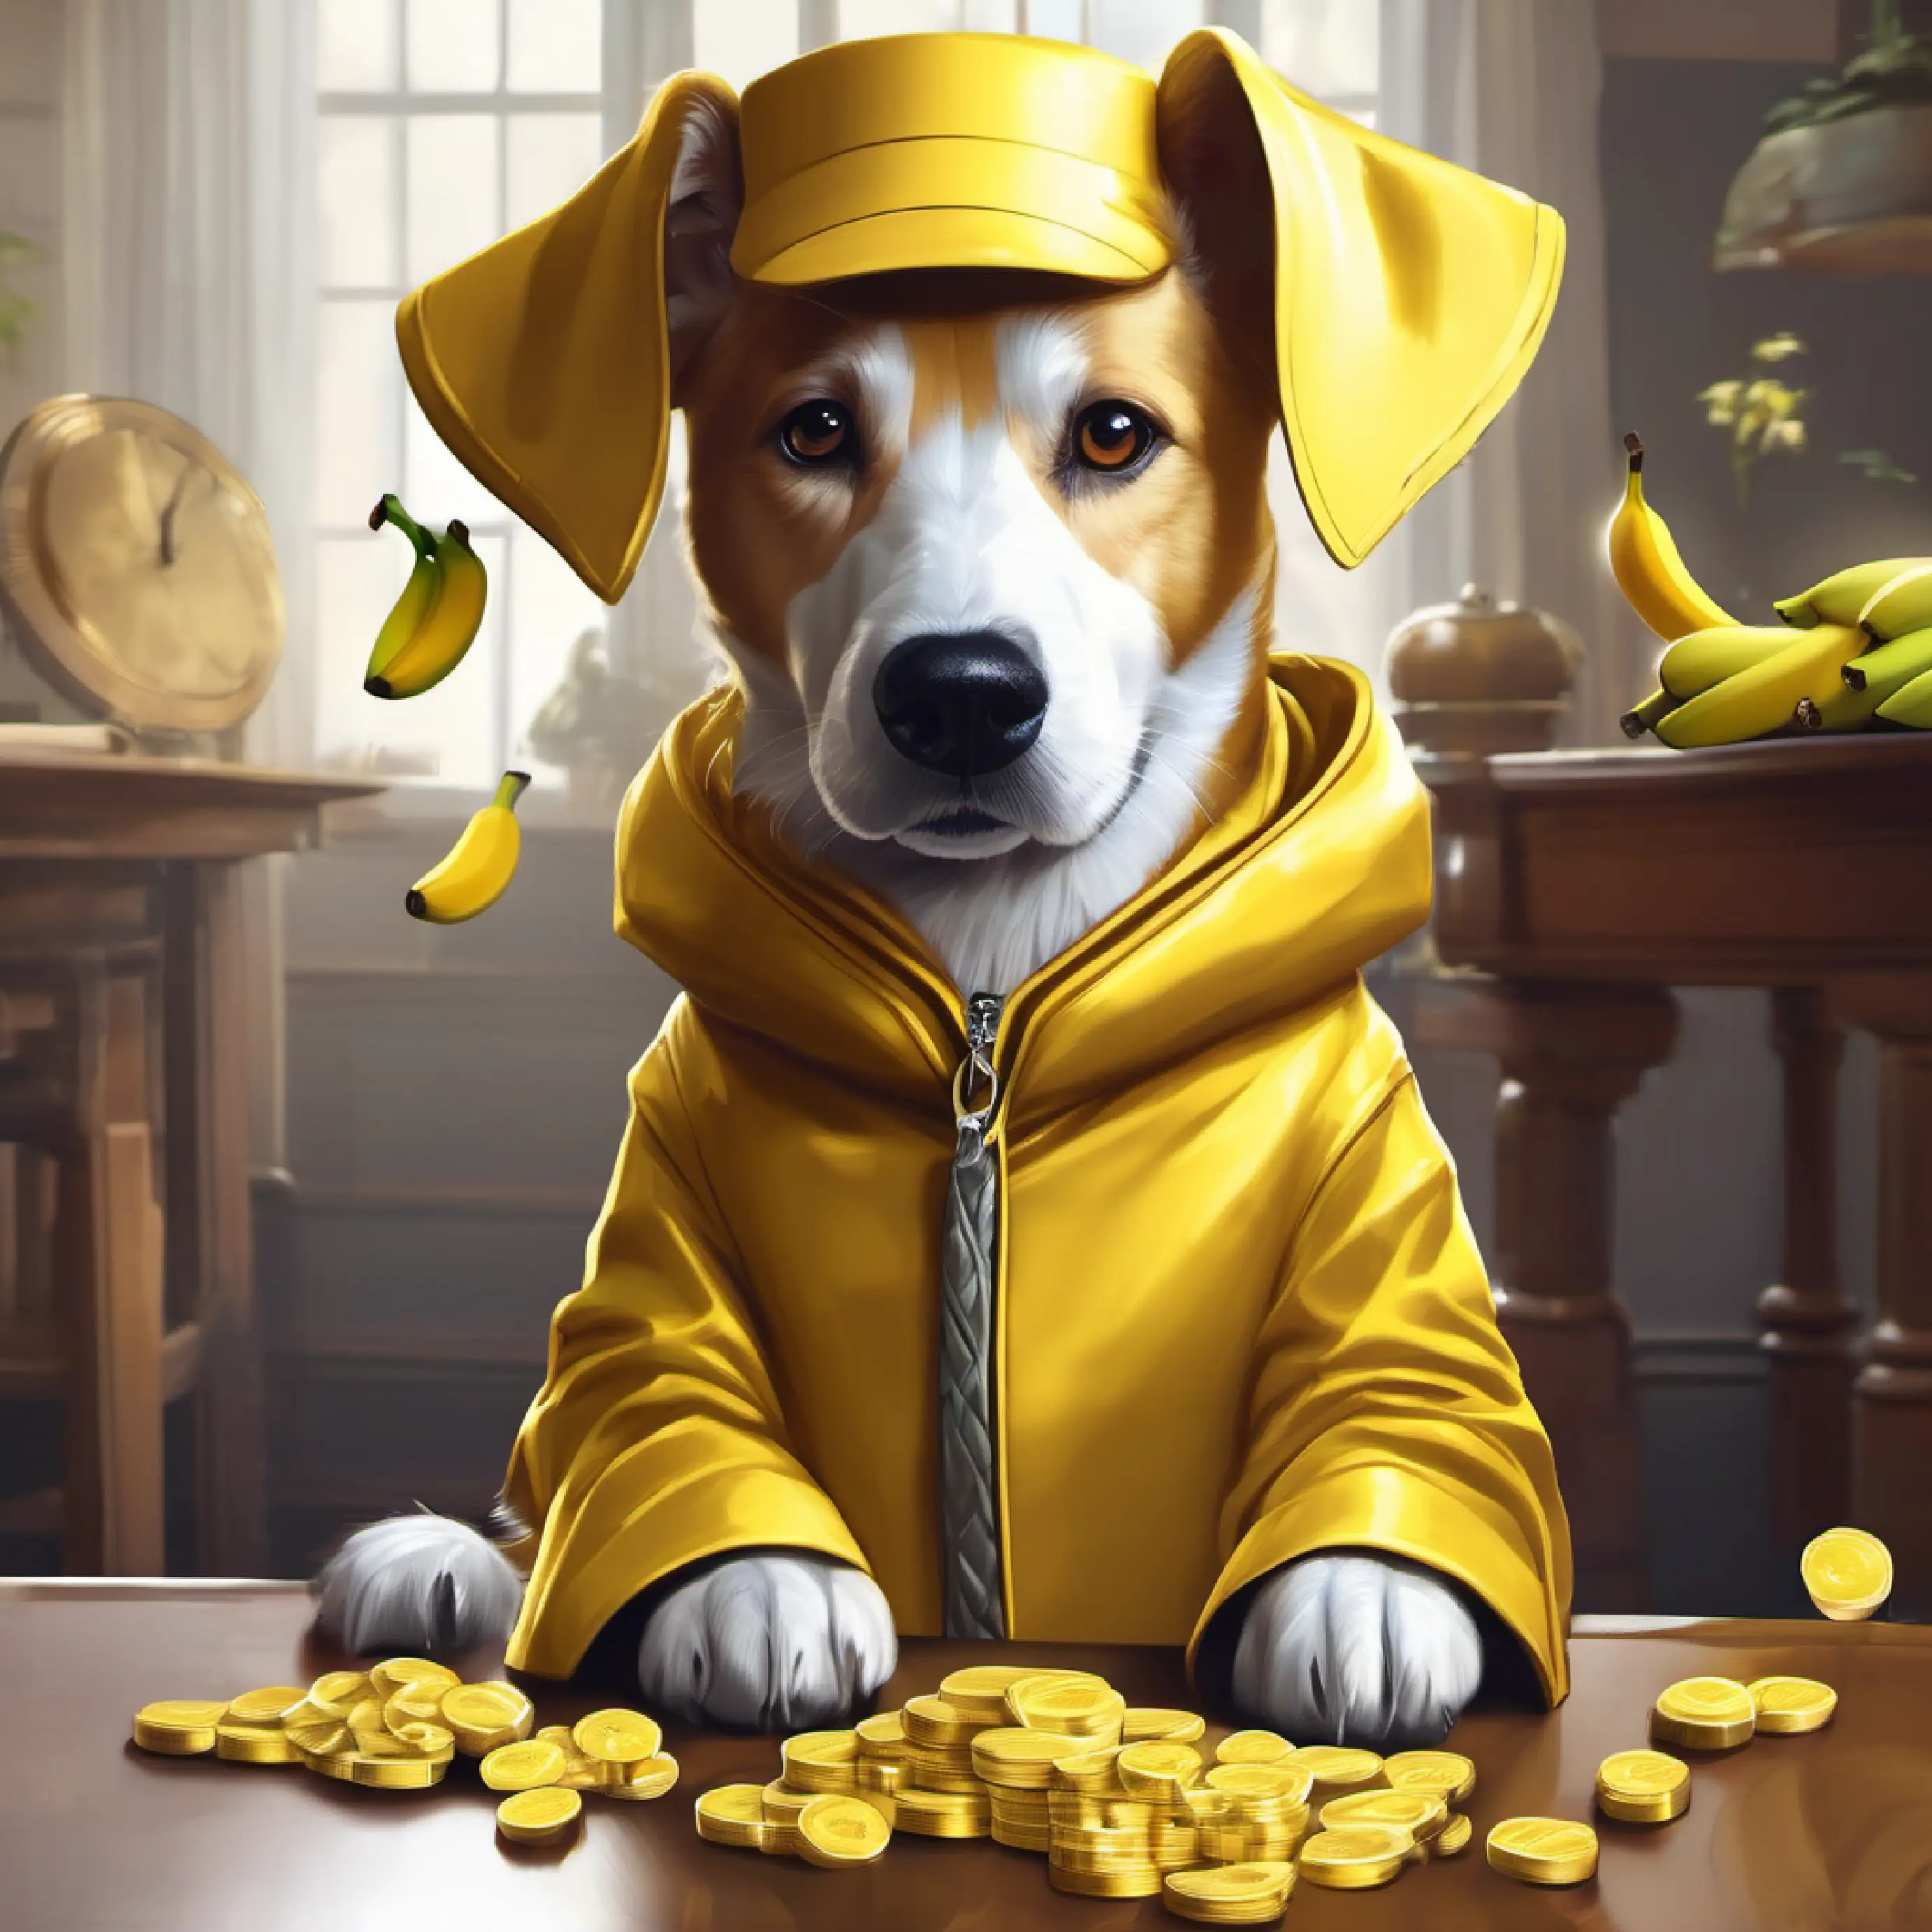 Golden coat, loves bananas, smart dog comes up with a counting game.